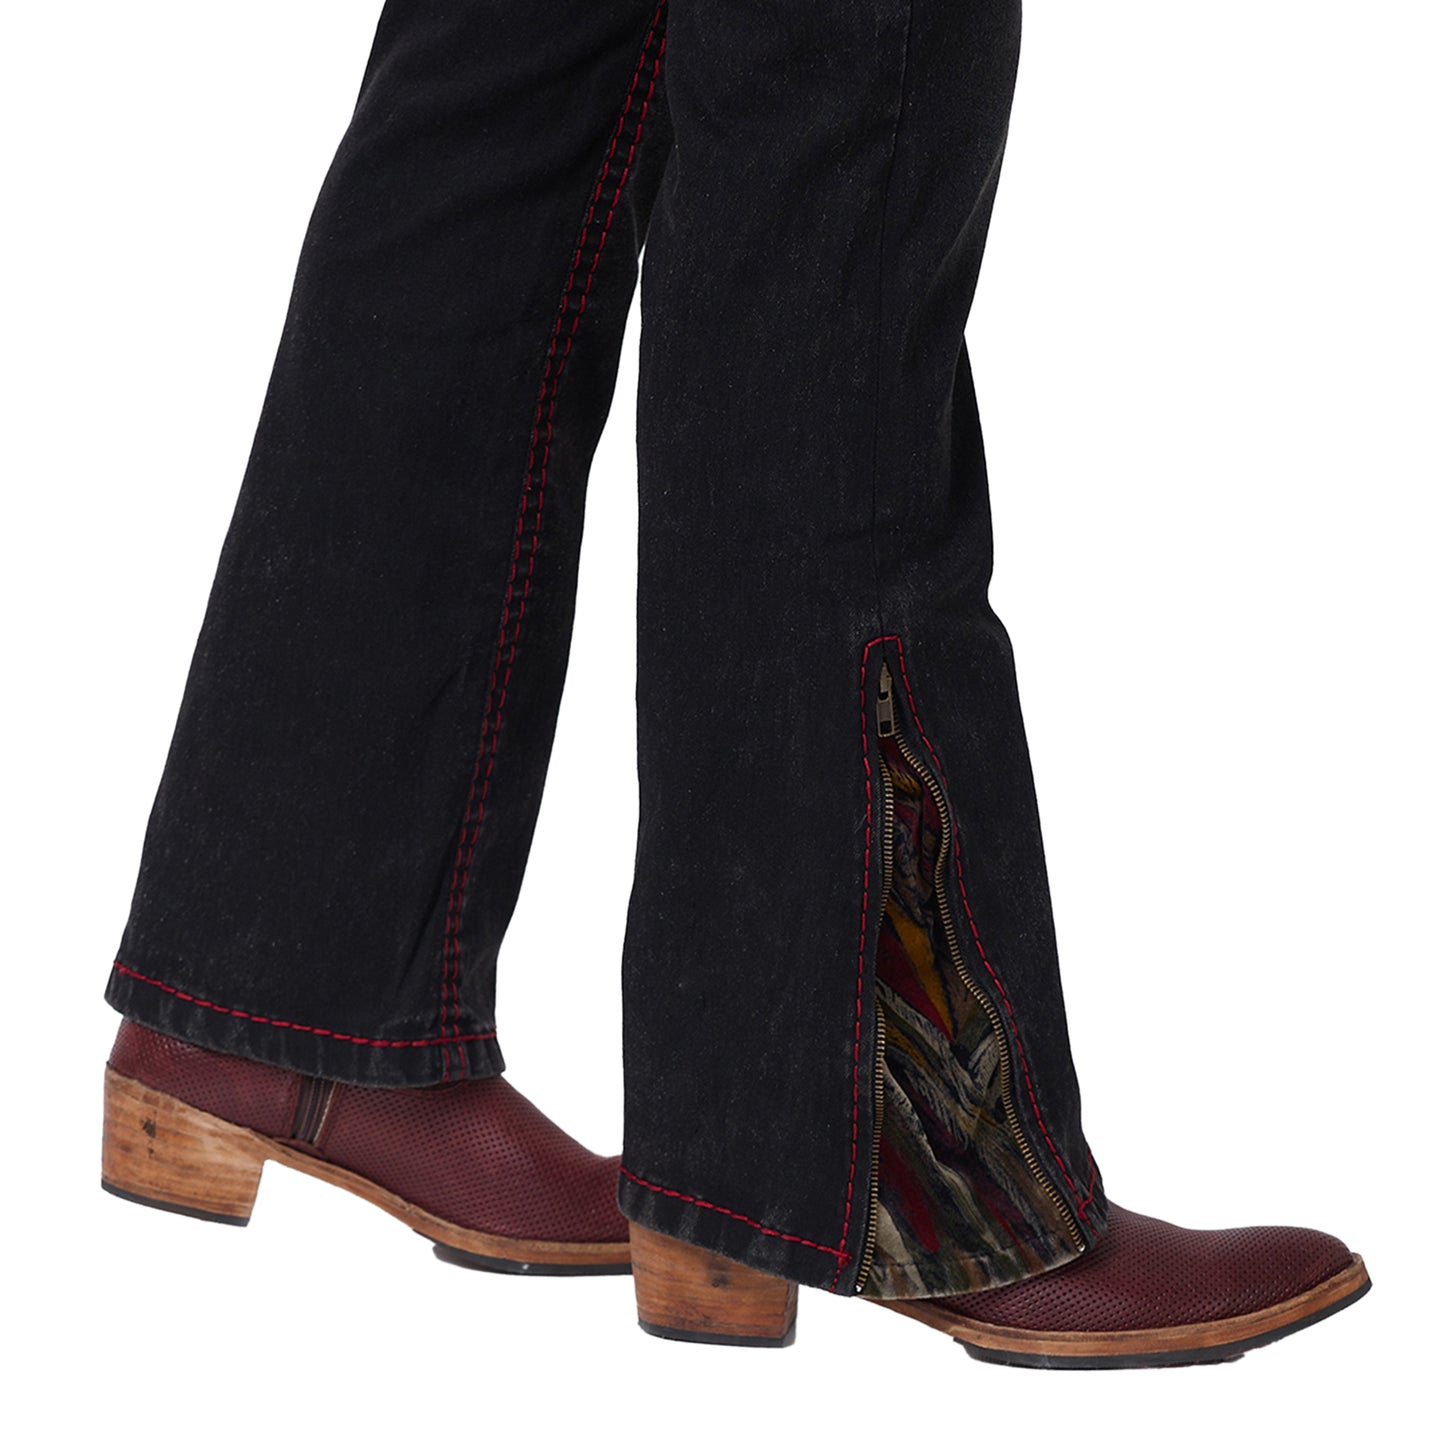 Mens Black Faded Bootcut Slim Fit Jeans With Maroon Saddle Stitch